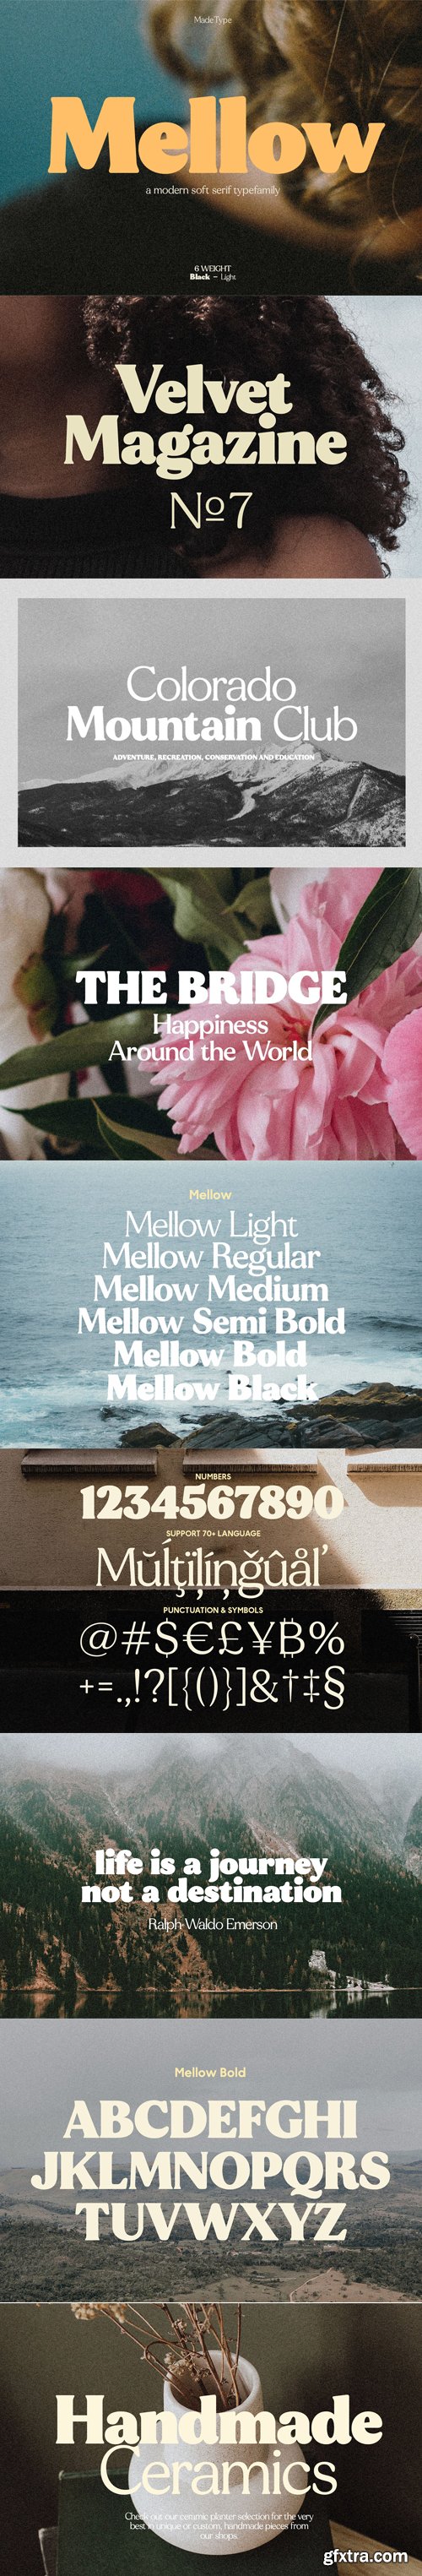 MADE Mellow Font Family